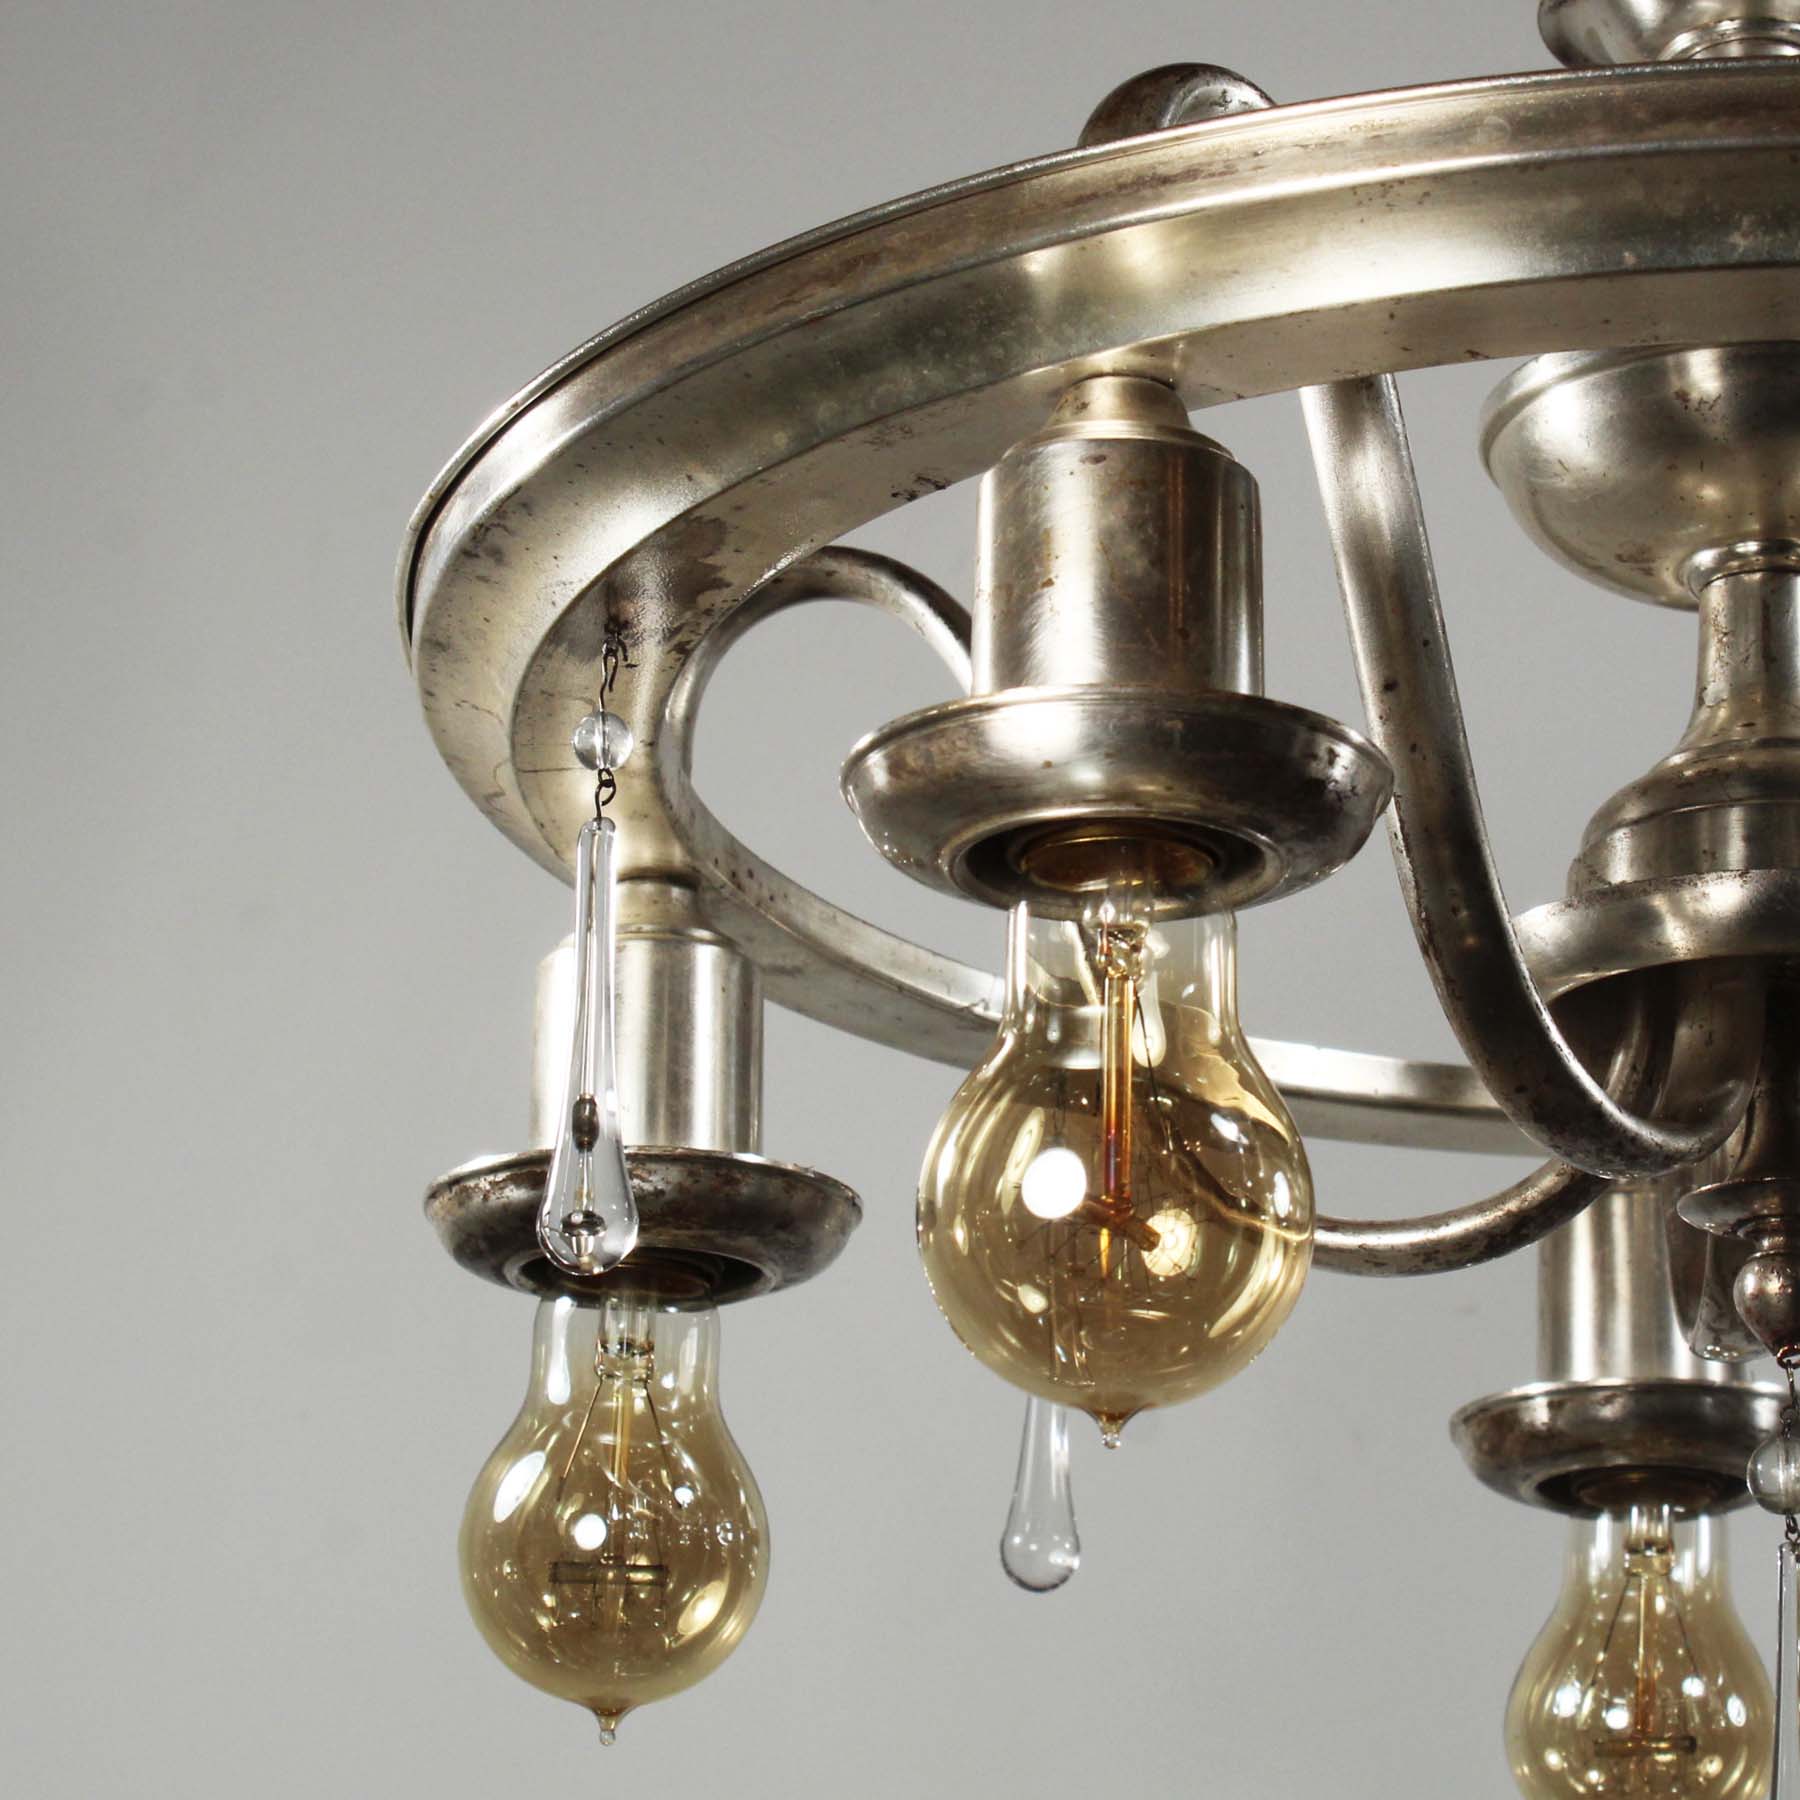 Neoclassical Silverplate Chandelier with Prisms, Antique Lighting-68966